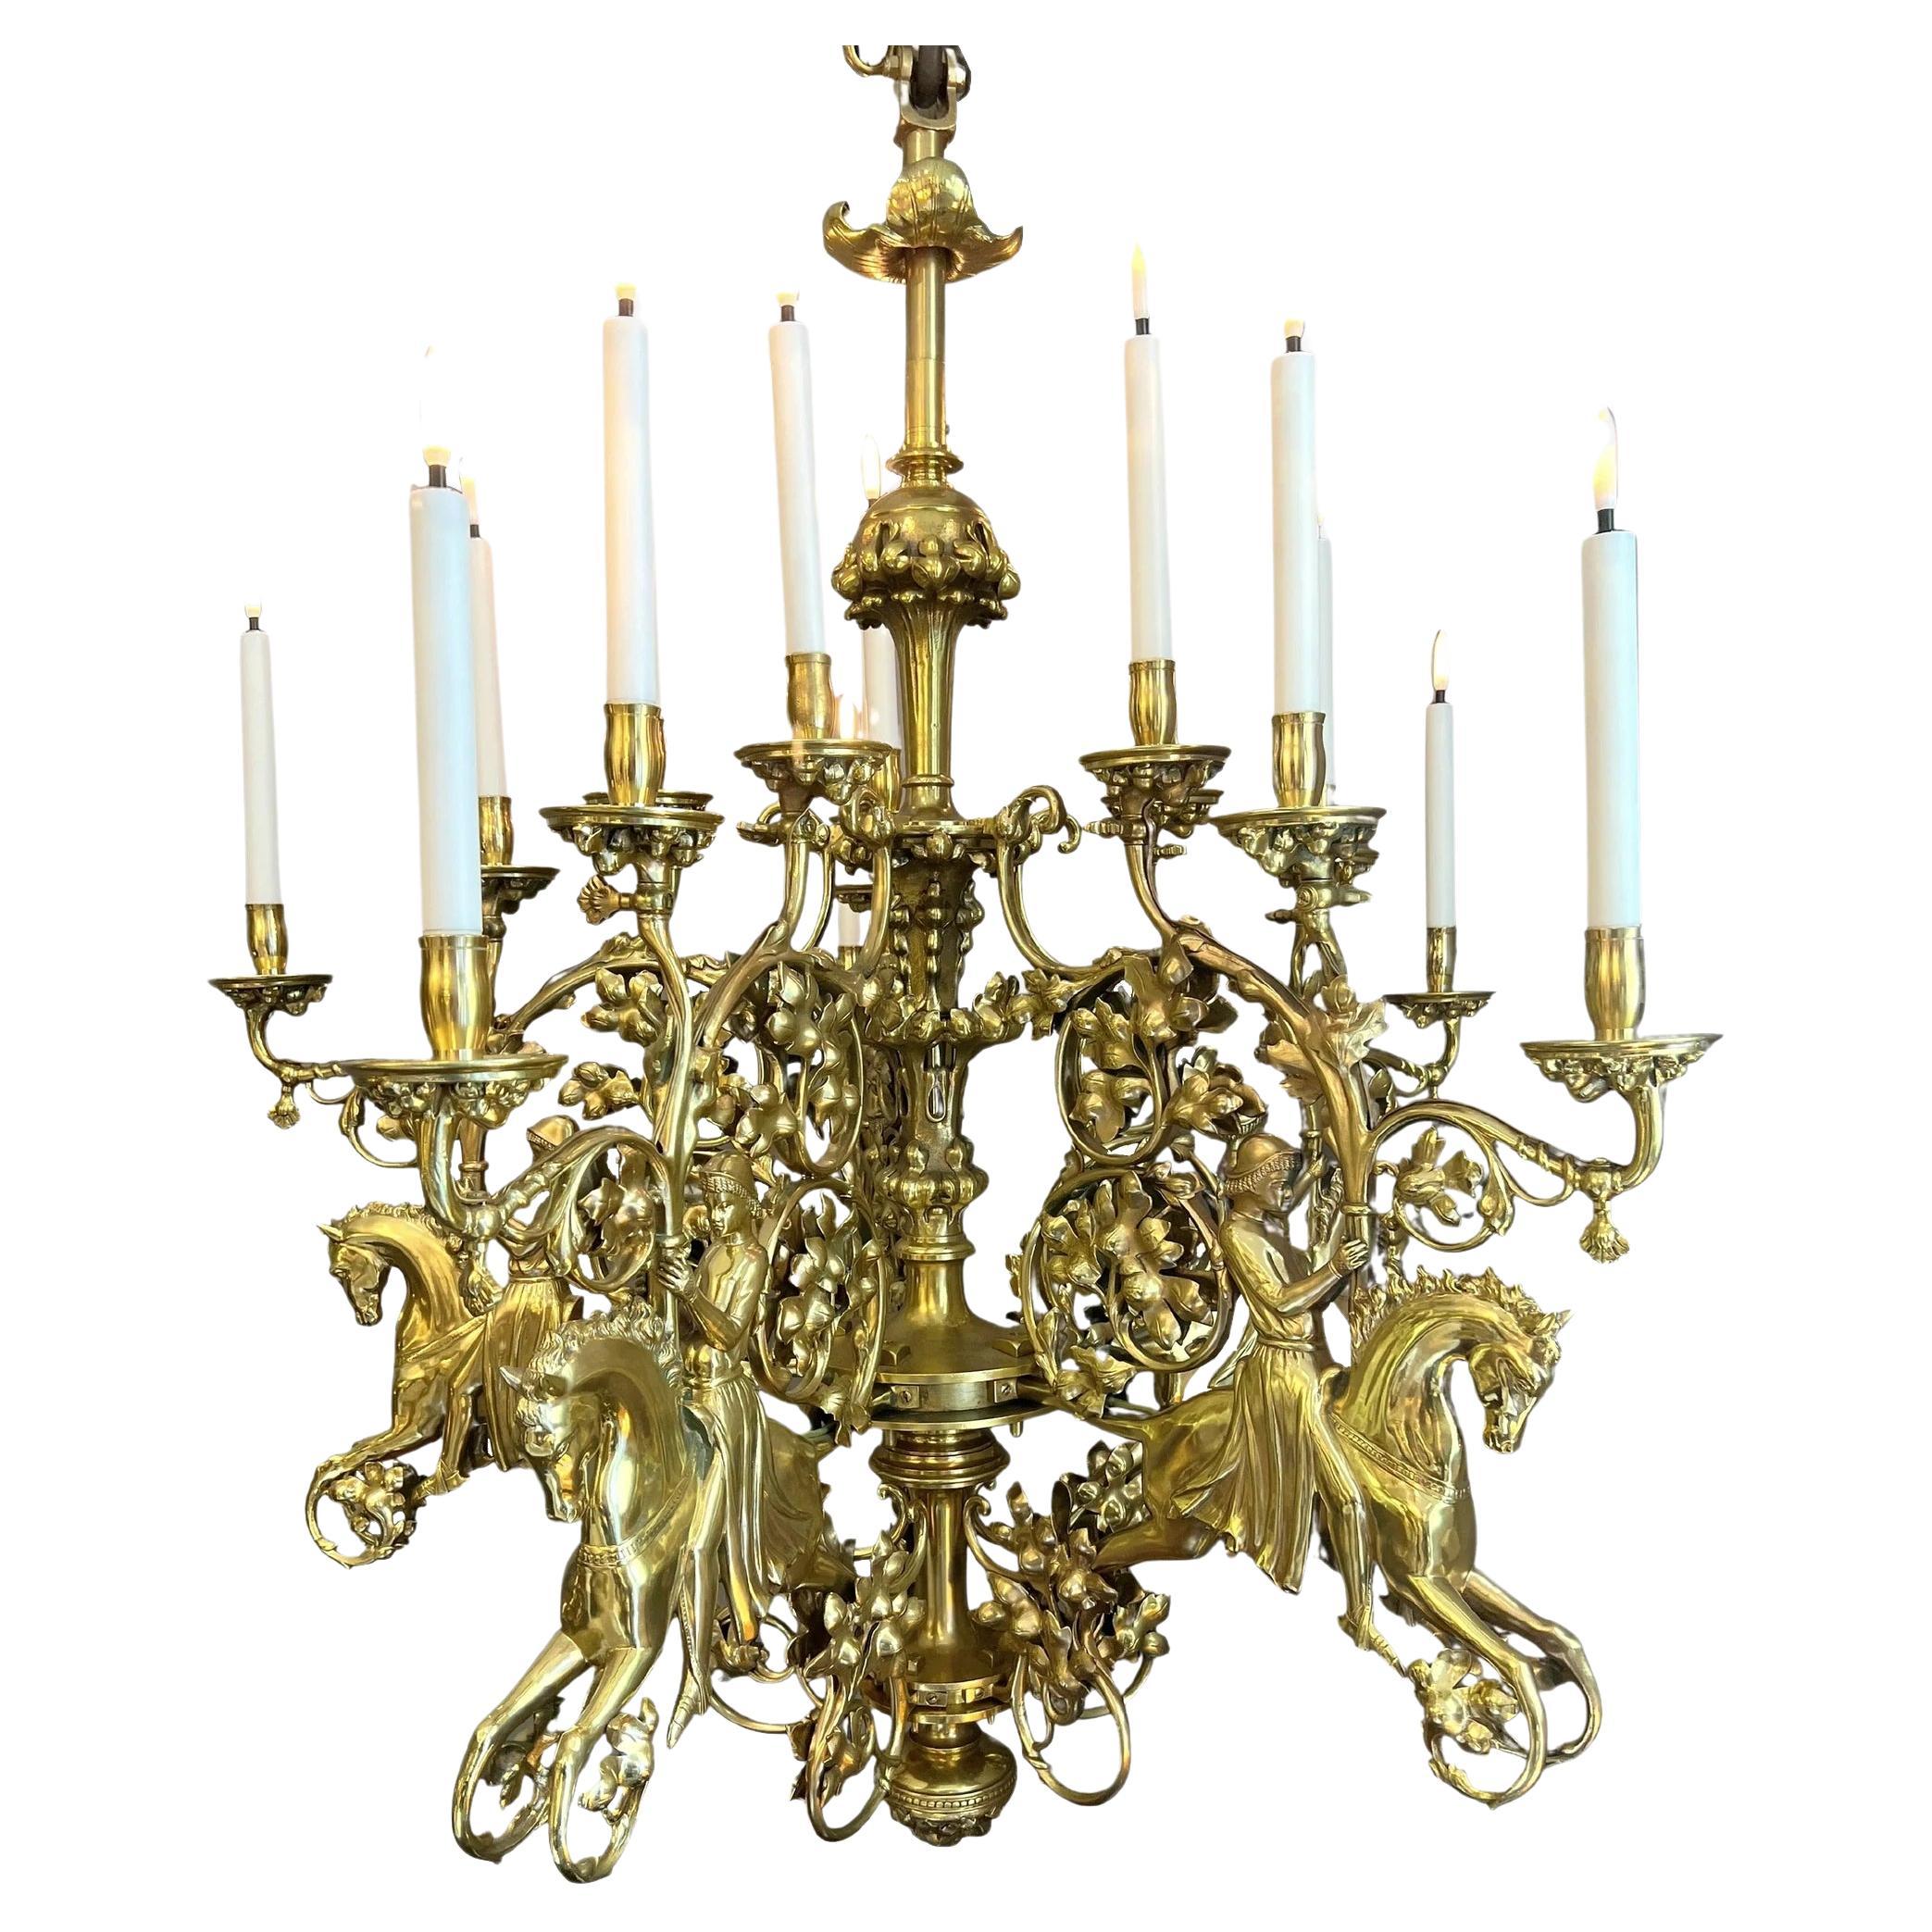 Chandelier with knights, in the style of E. Viollet-le-Duc, France, circa 1880